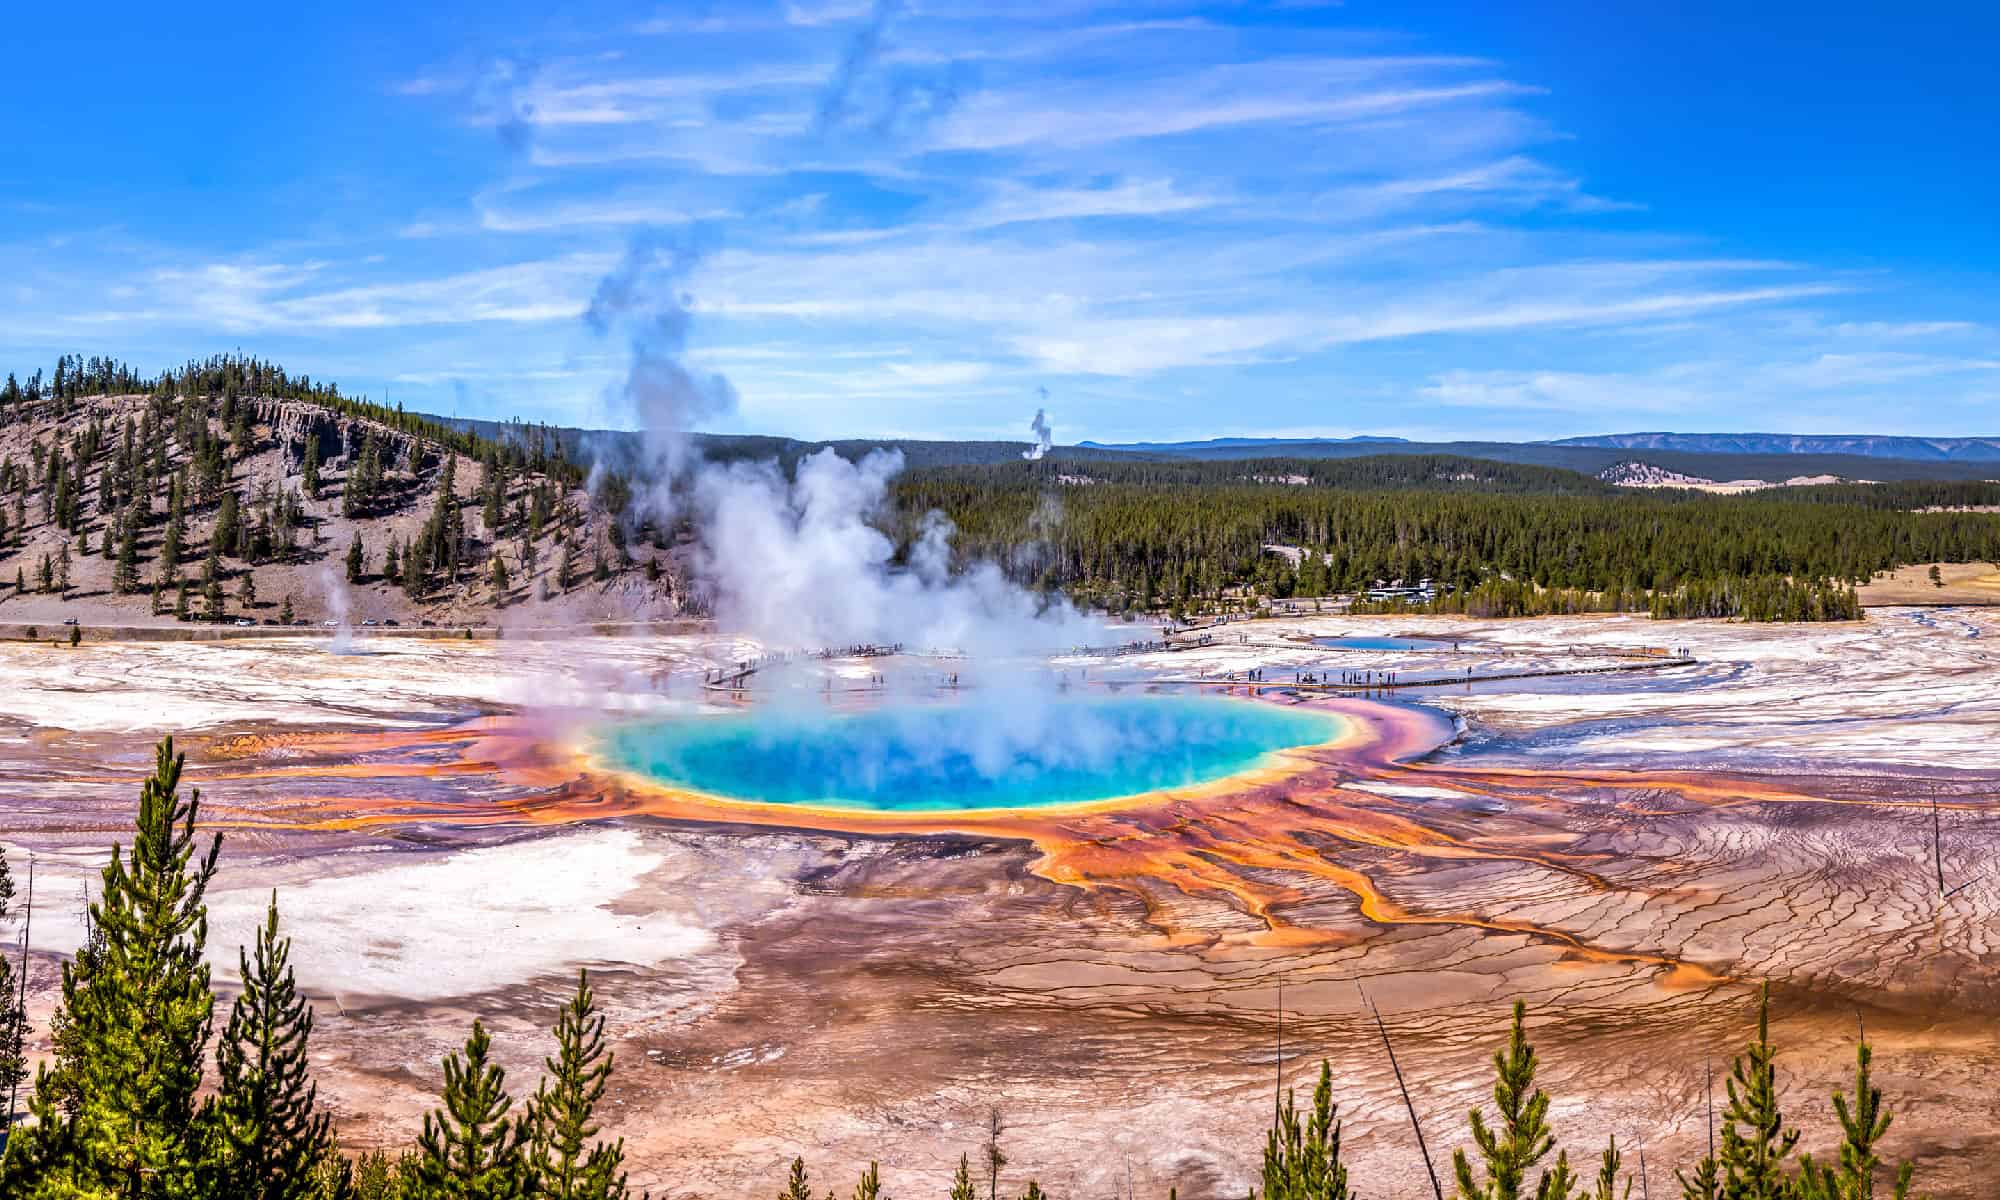 Uncover the 15 Most Lovely Nationwide Parks within the US